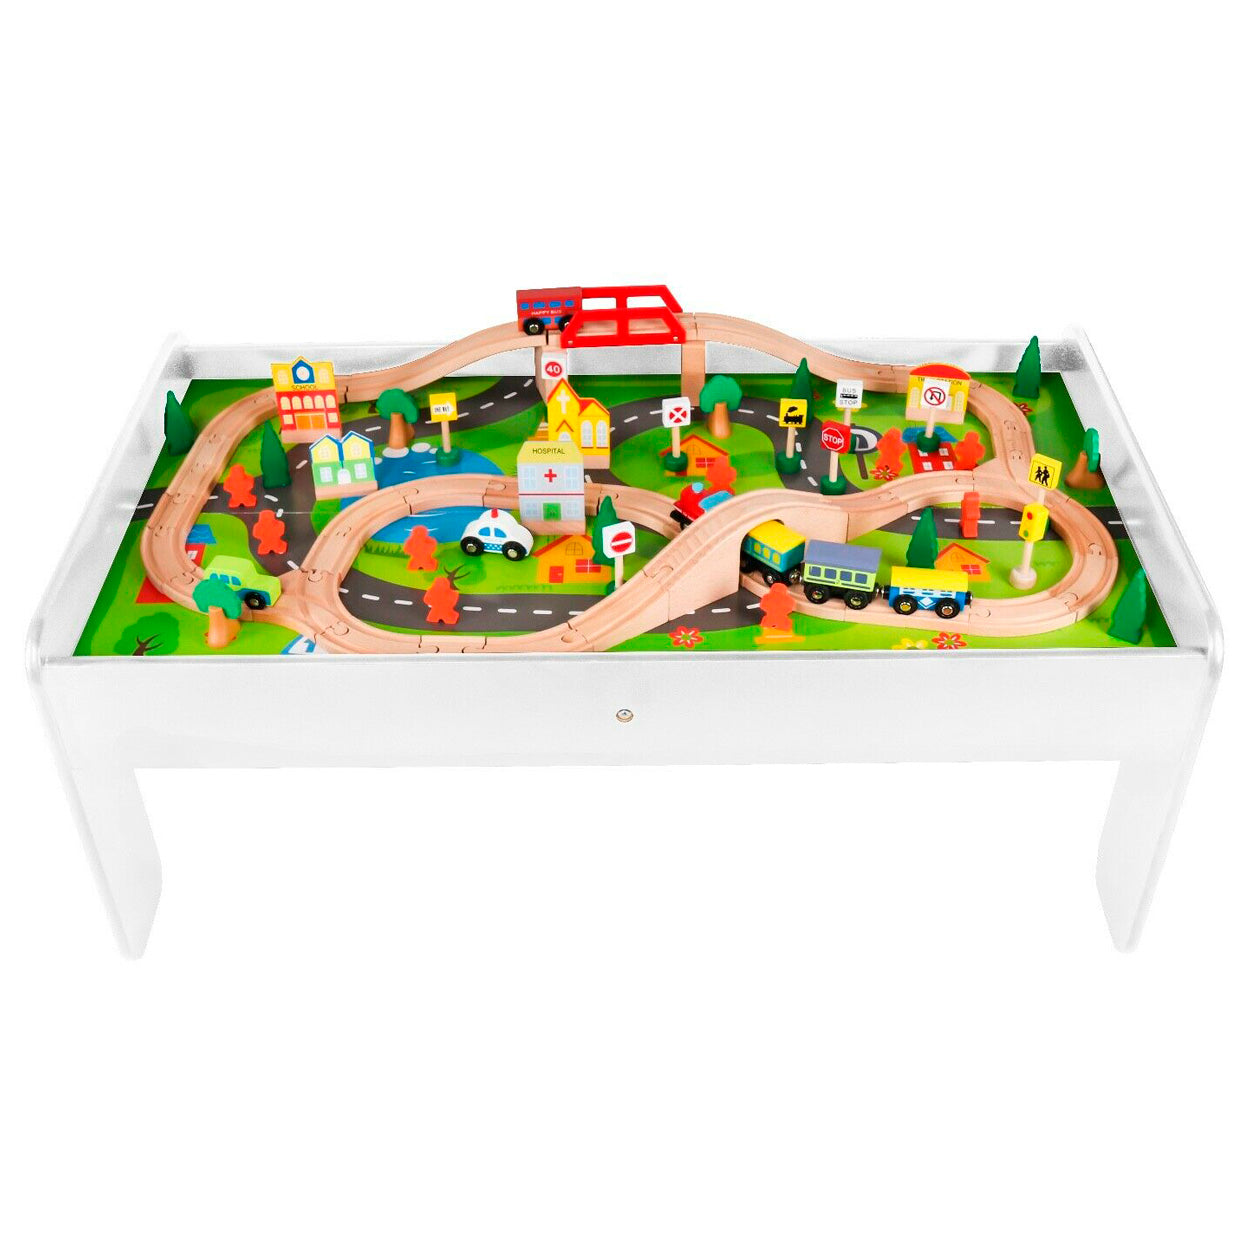 Train Table Sets - All Aboard These 12 Train Tables Are Perfect For Your Little Conductor - If you already have a complete wooden train set, or plan on purchasing one separately, buying a train table that doesn't come with a train set makes a lot of.